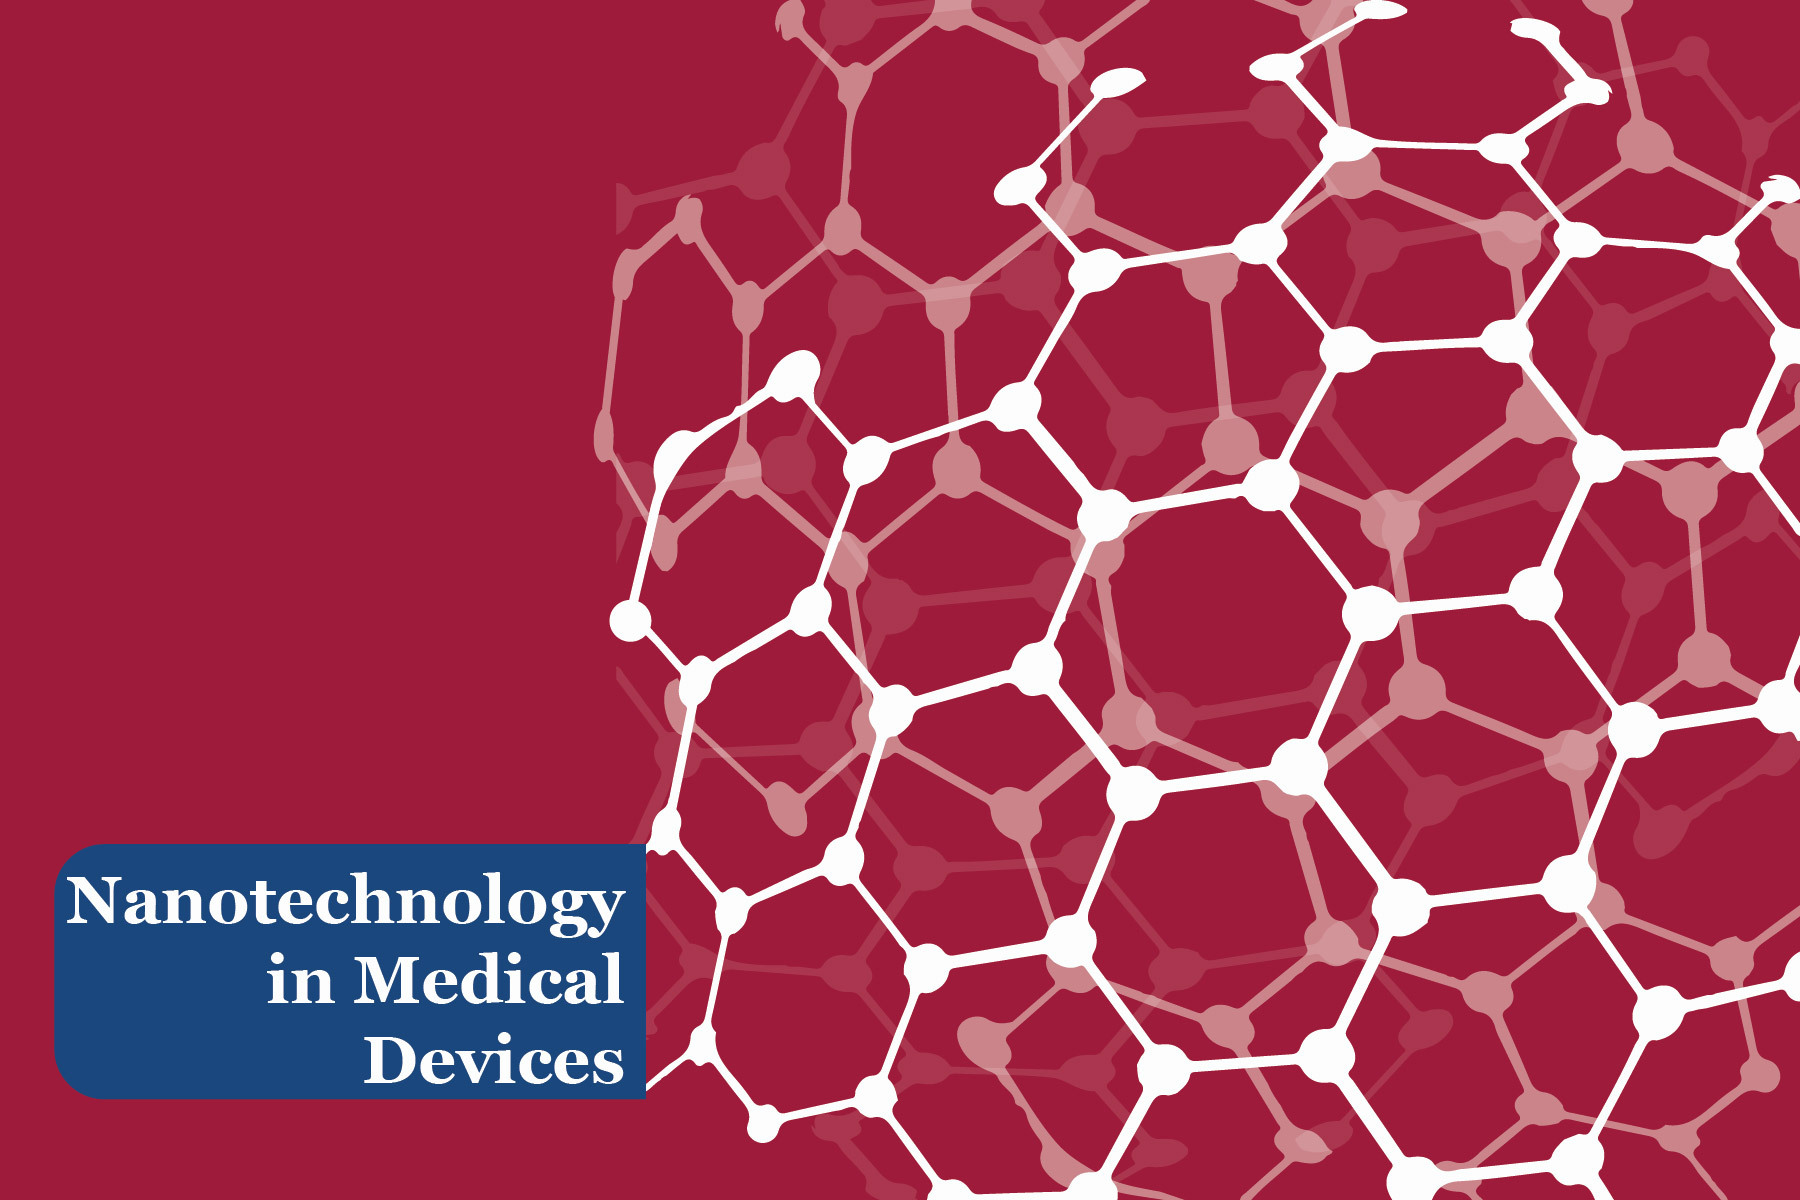 Nanotechnology in Medical Devices